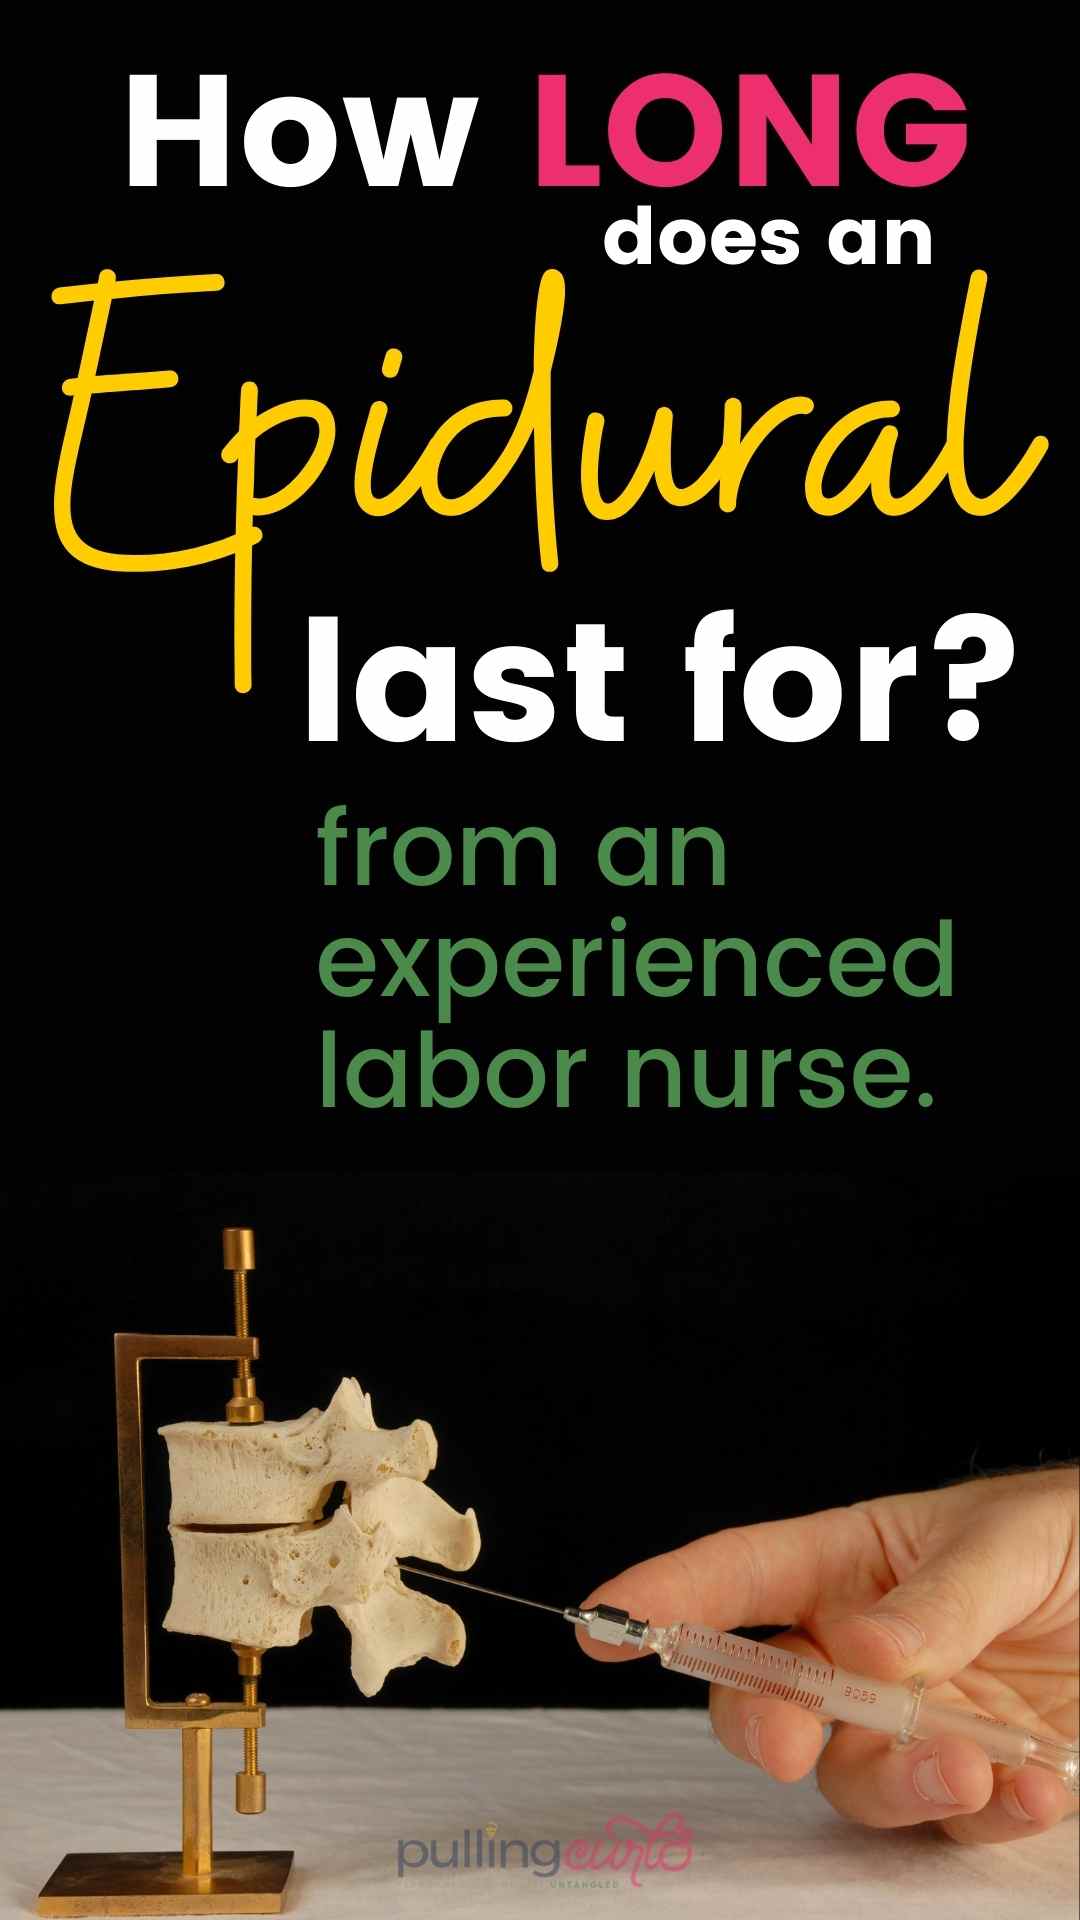 This 2nd article in my Epidural series -- this one talks about how long you can expect the epidural to last, how long it takes to wear off and when to get it so it lasts your whole labor. Needle, pros and cons, vs natural, labor, side effects, back pain relief, facts, birth, tips. via @pullingcurls